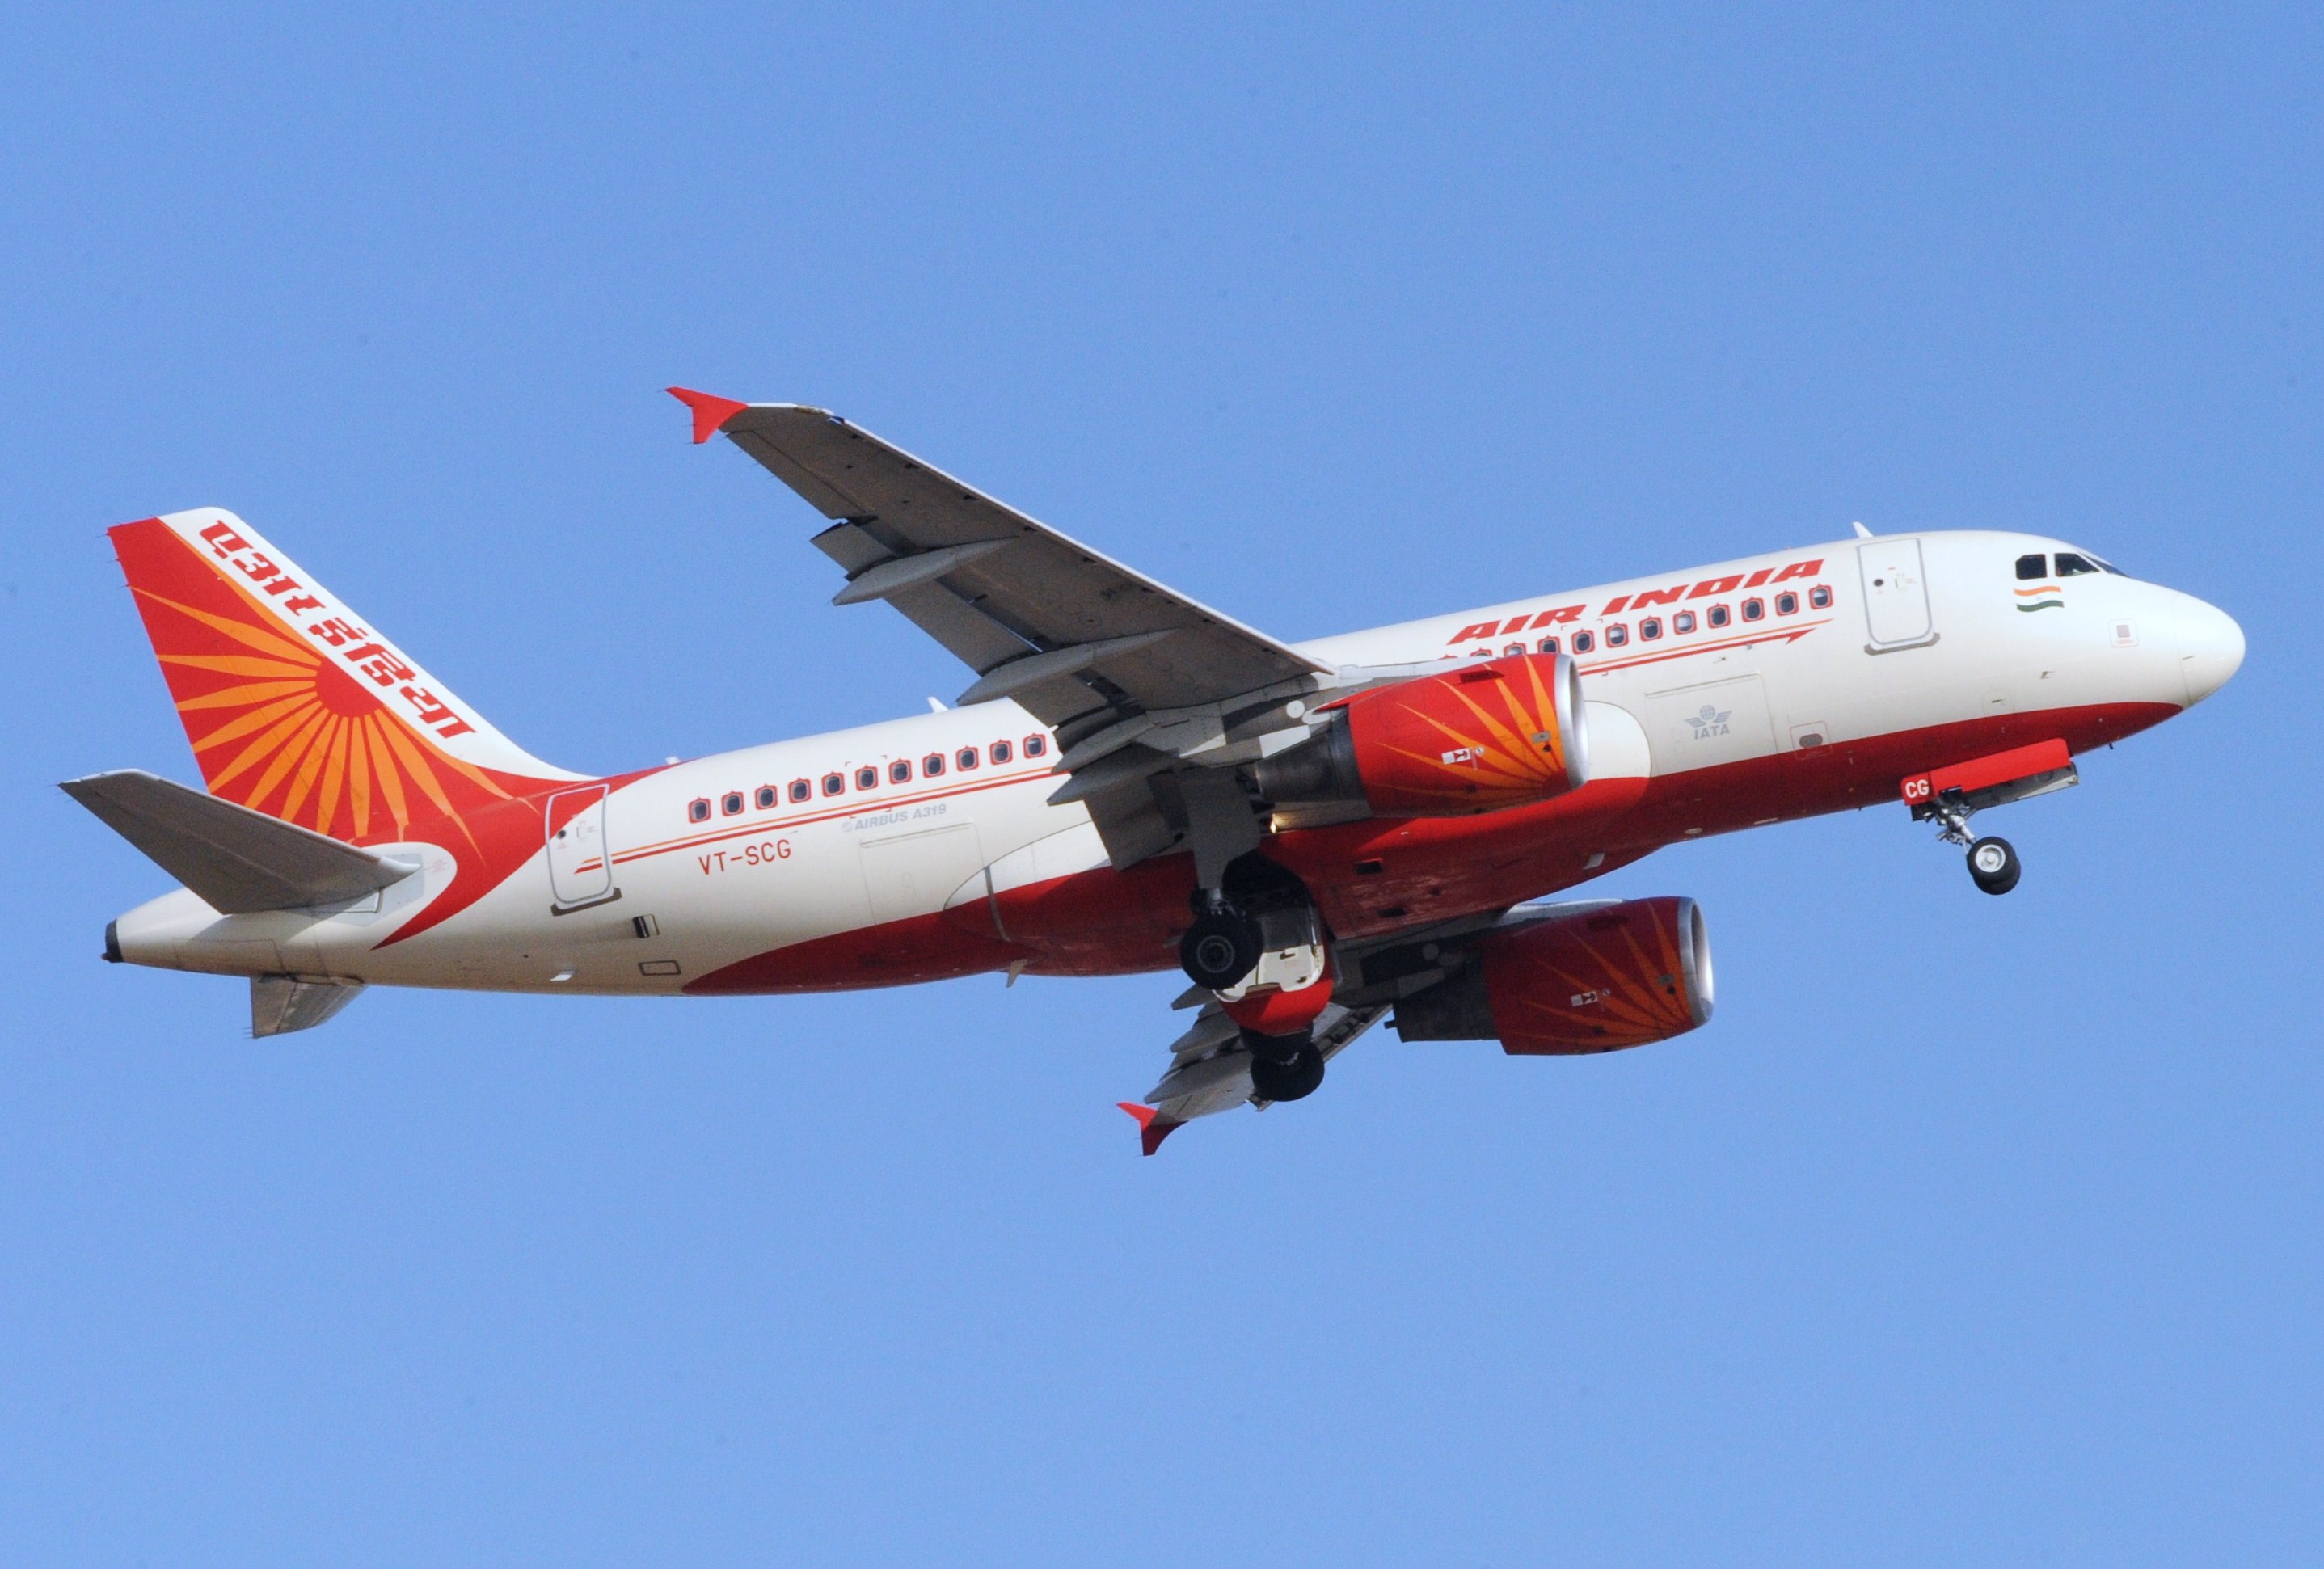 Flying to India this month? Air India has a special offer for you